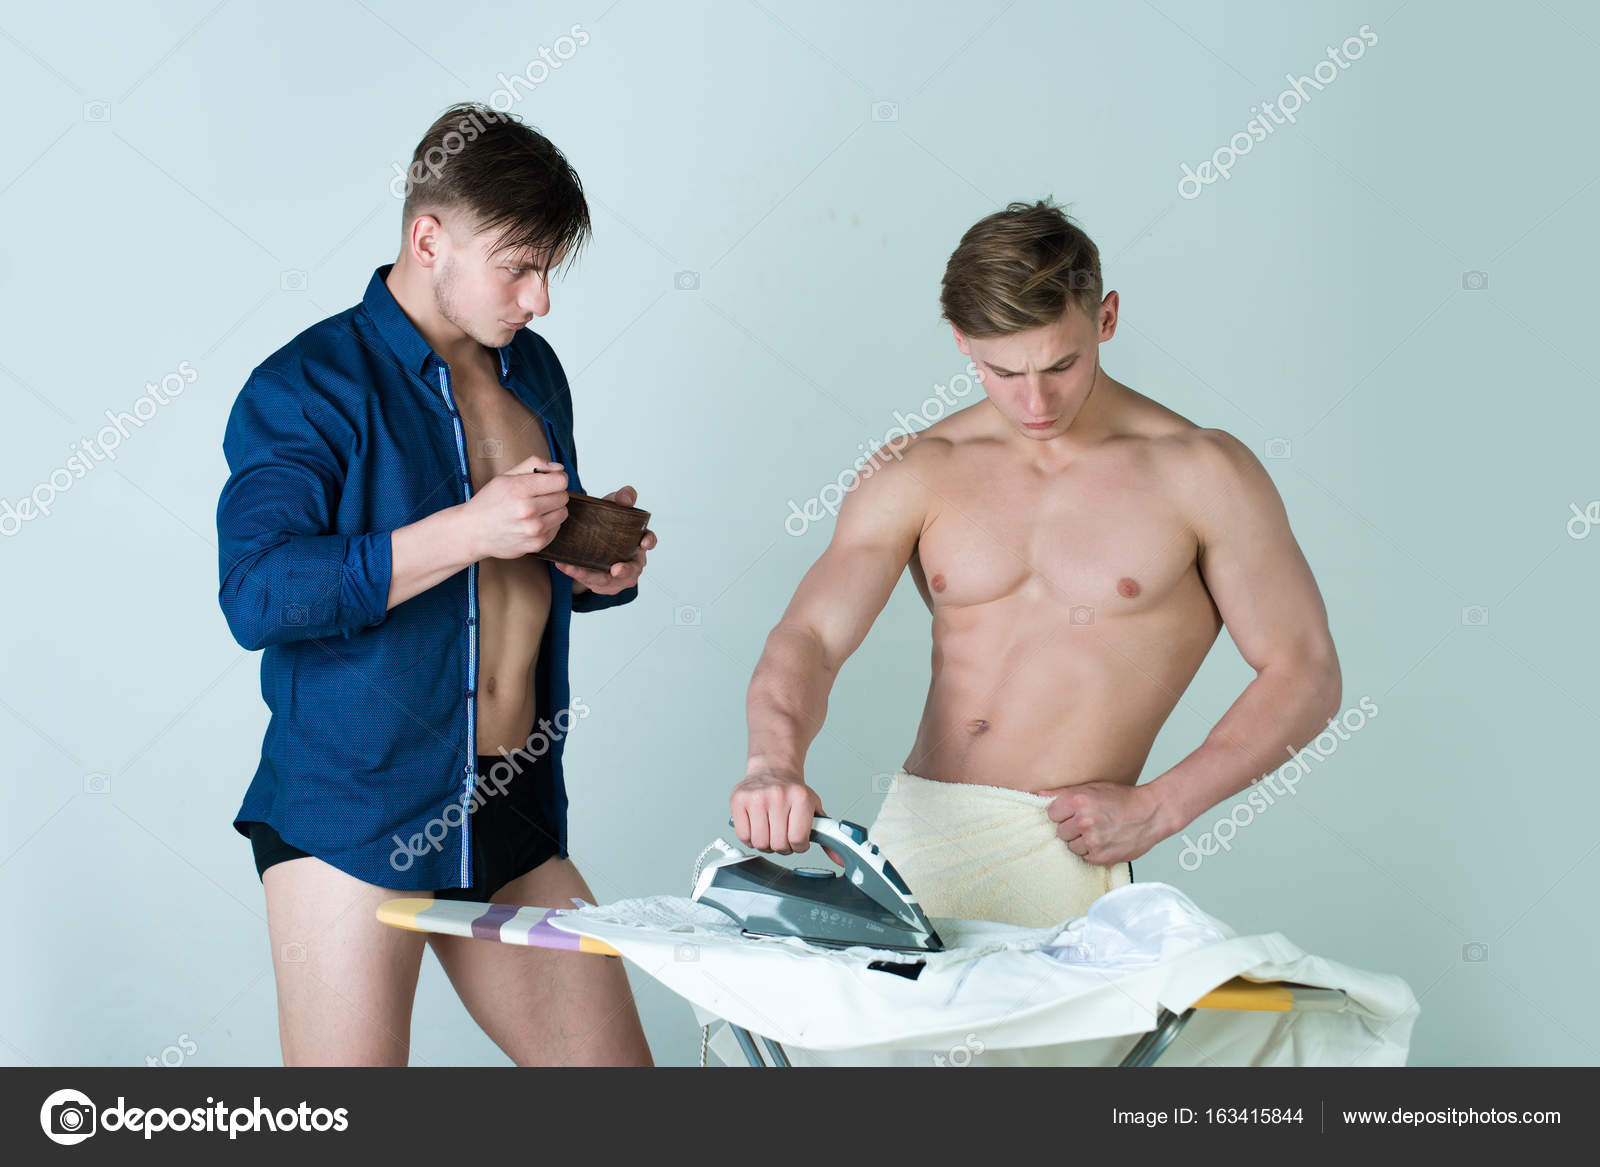 Man ironing clothes with iron on board - Stock Photo. 